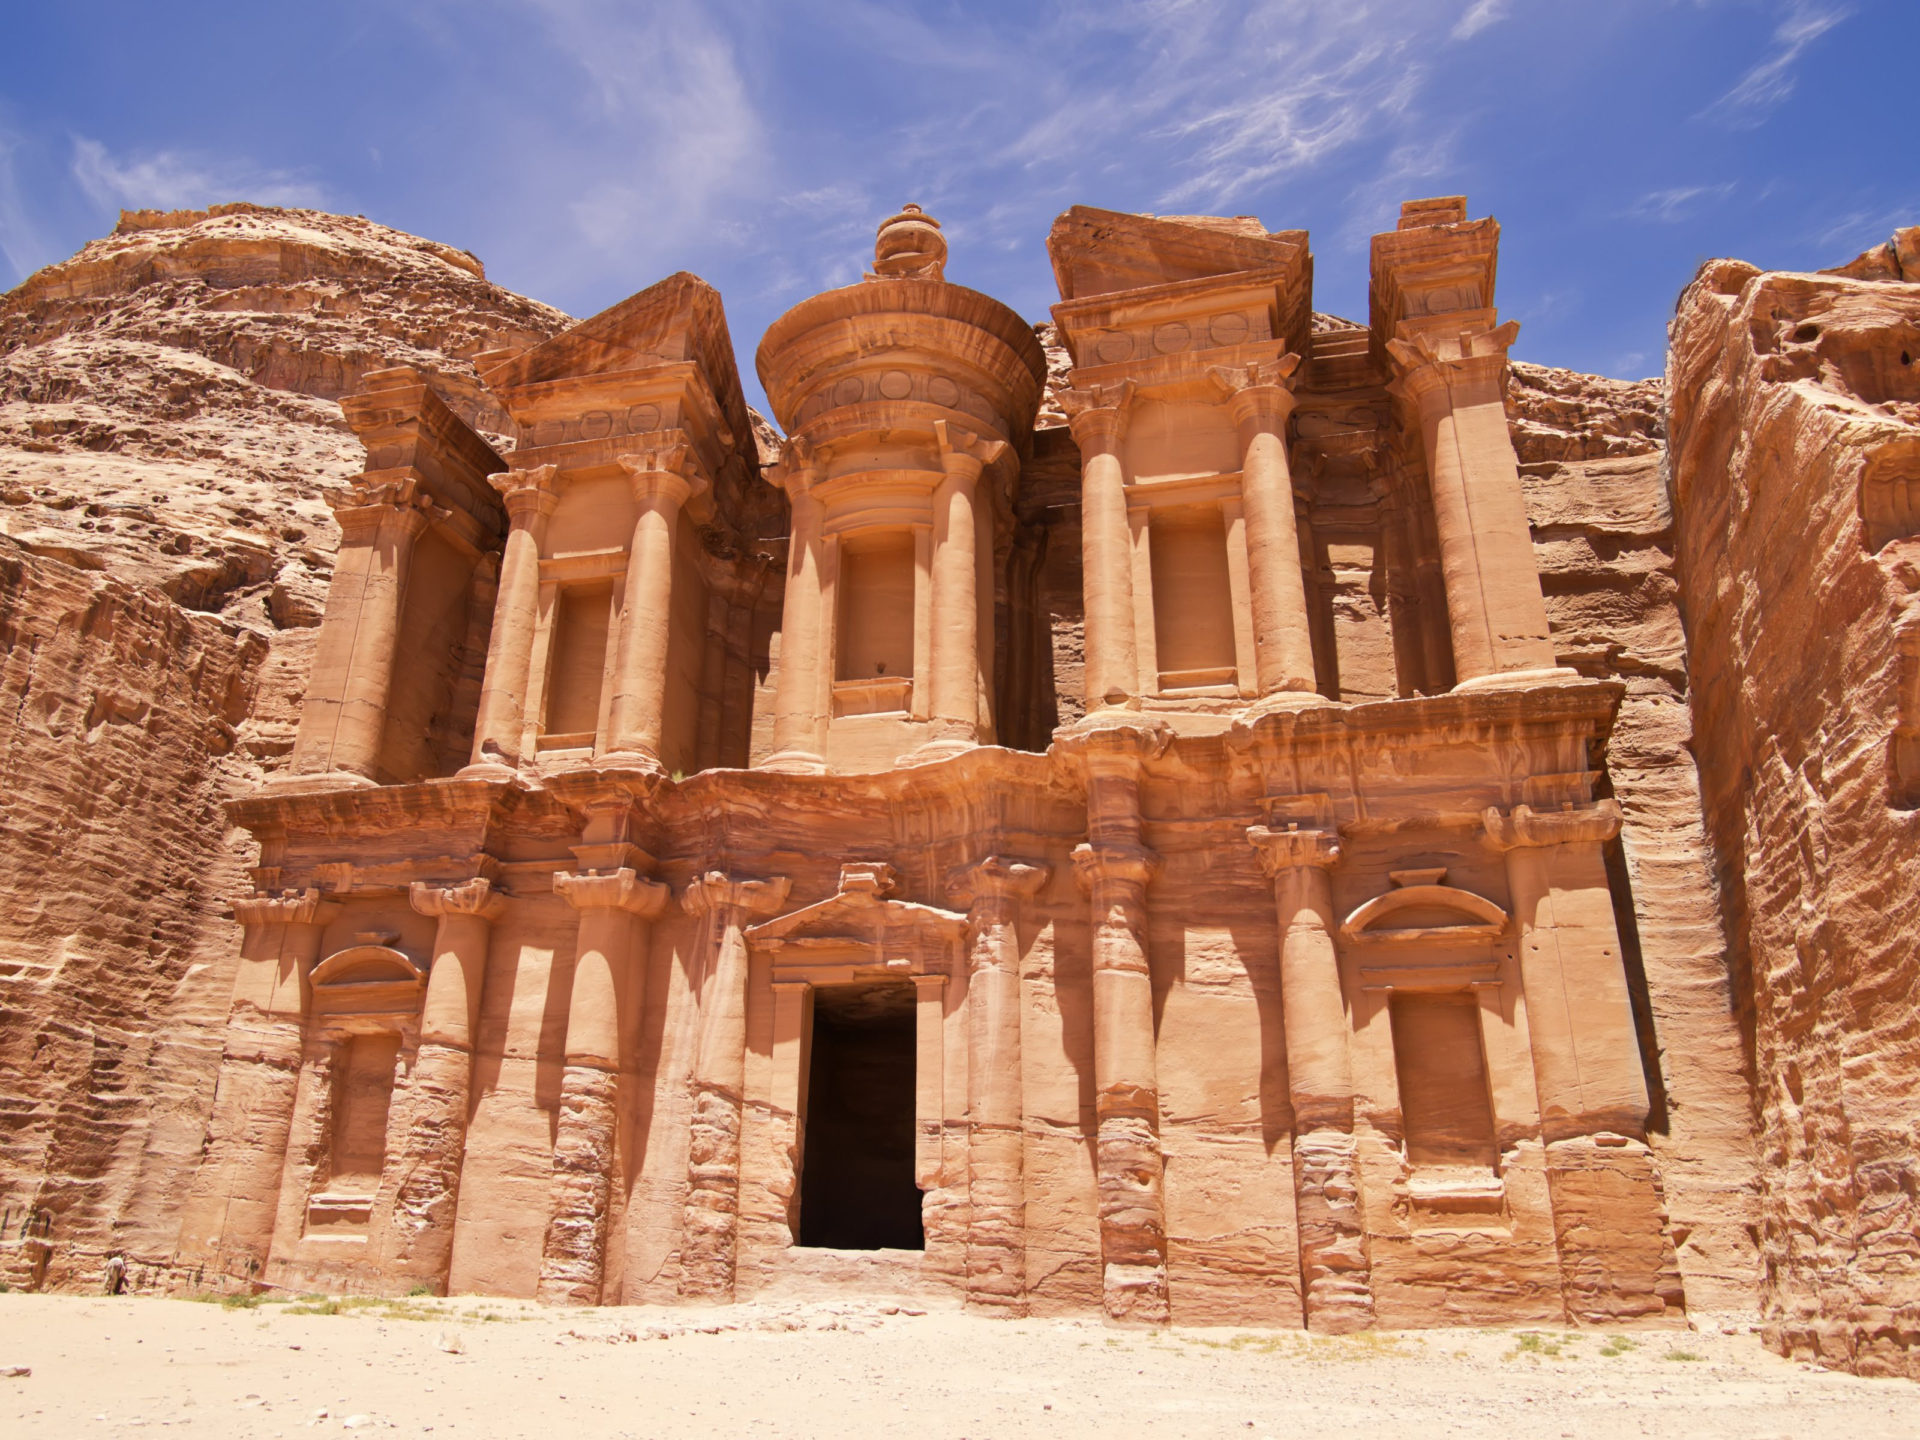 Monastery and Petra Jordan, Capital of the Nabateans, Archaeological wonder, Famous site, 1920x1440 HD Desktop